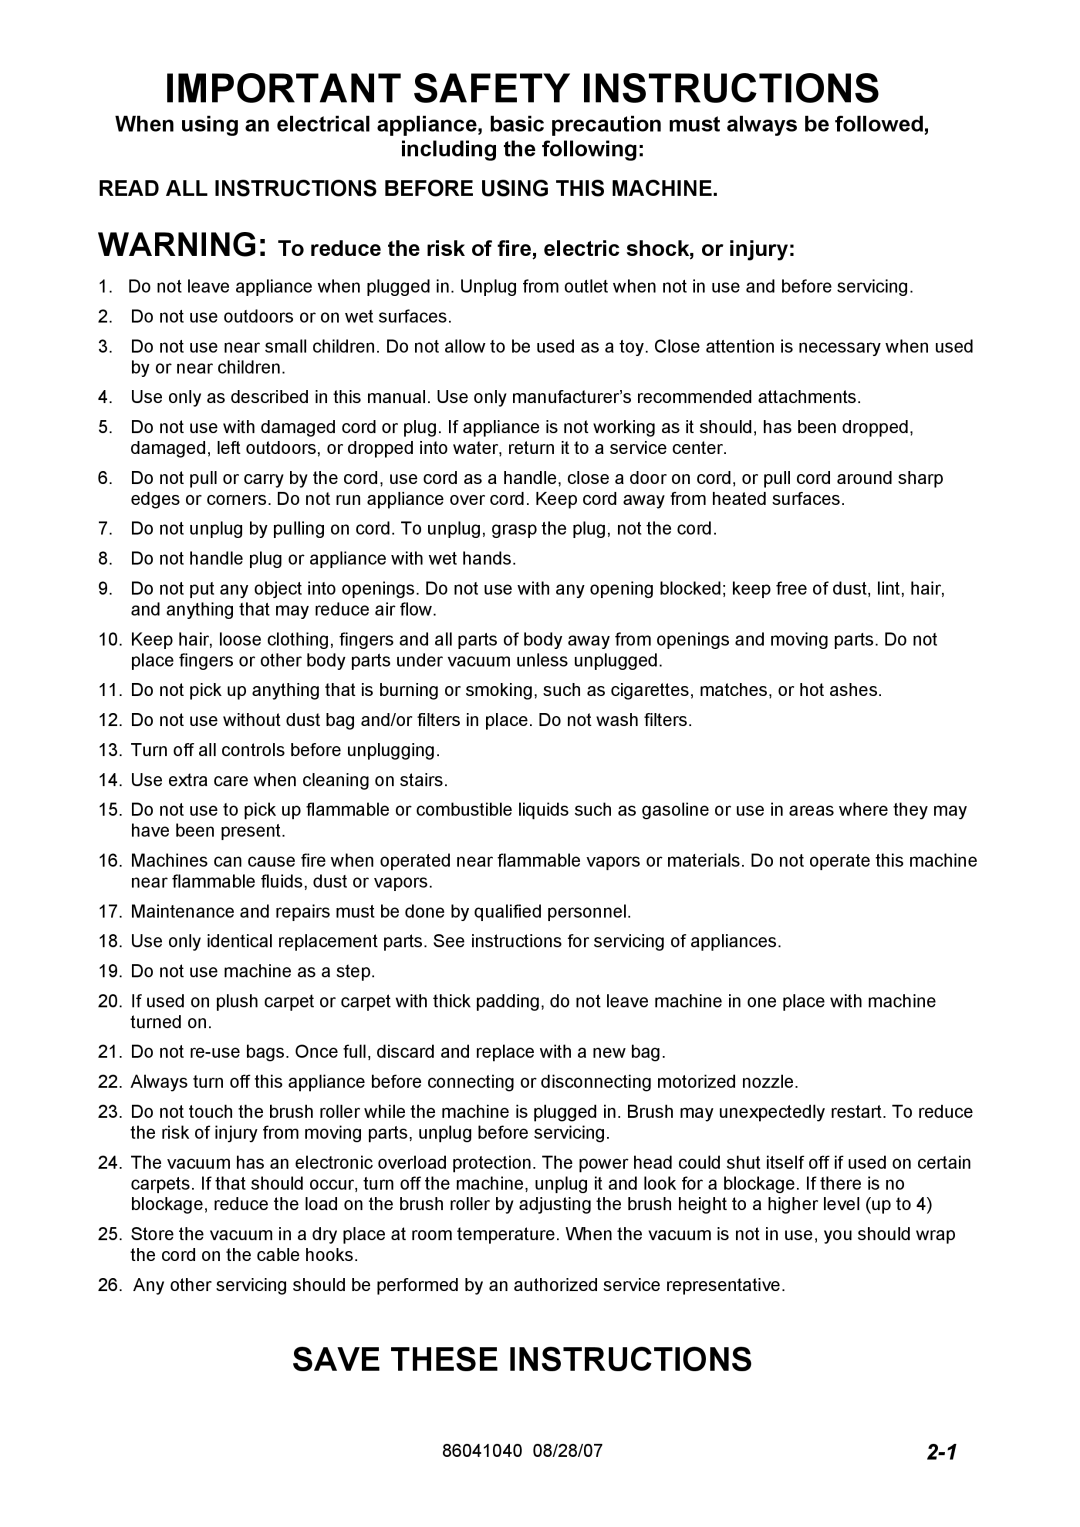 Windsor FM12 10120030, FM15 10120040 Important Safety Instructions, Save These Instructions, including the following 